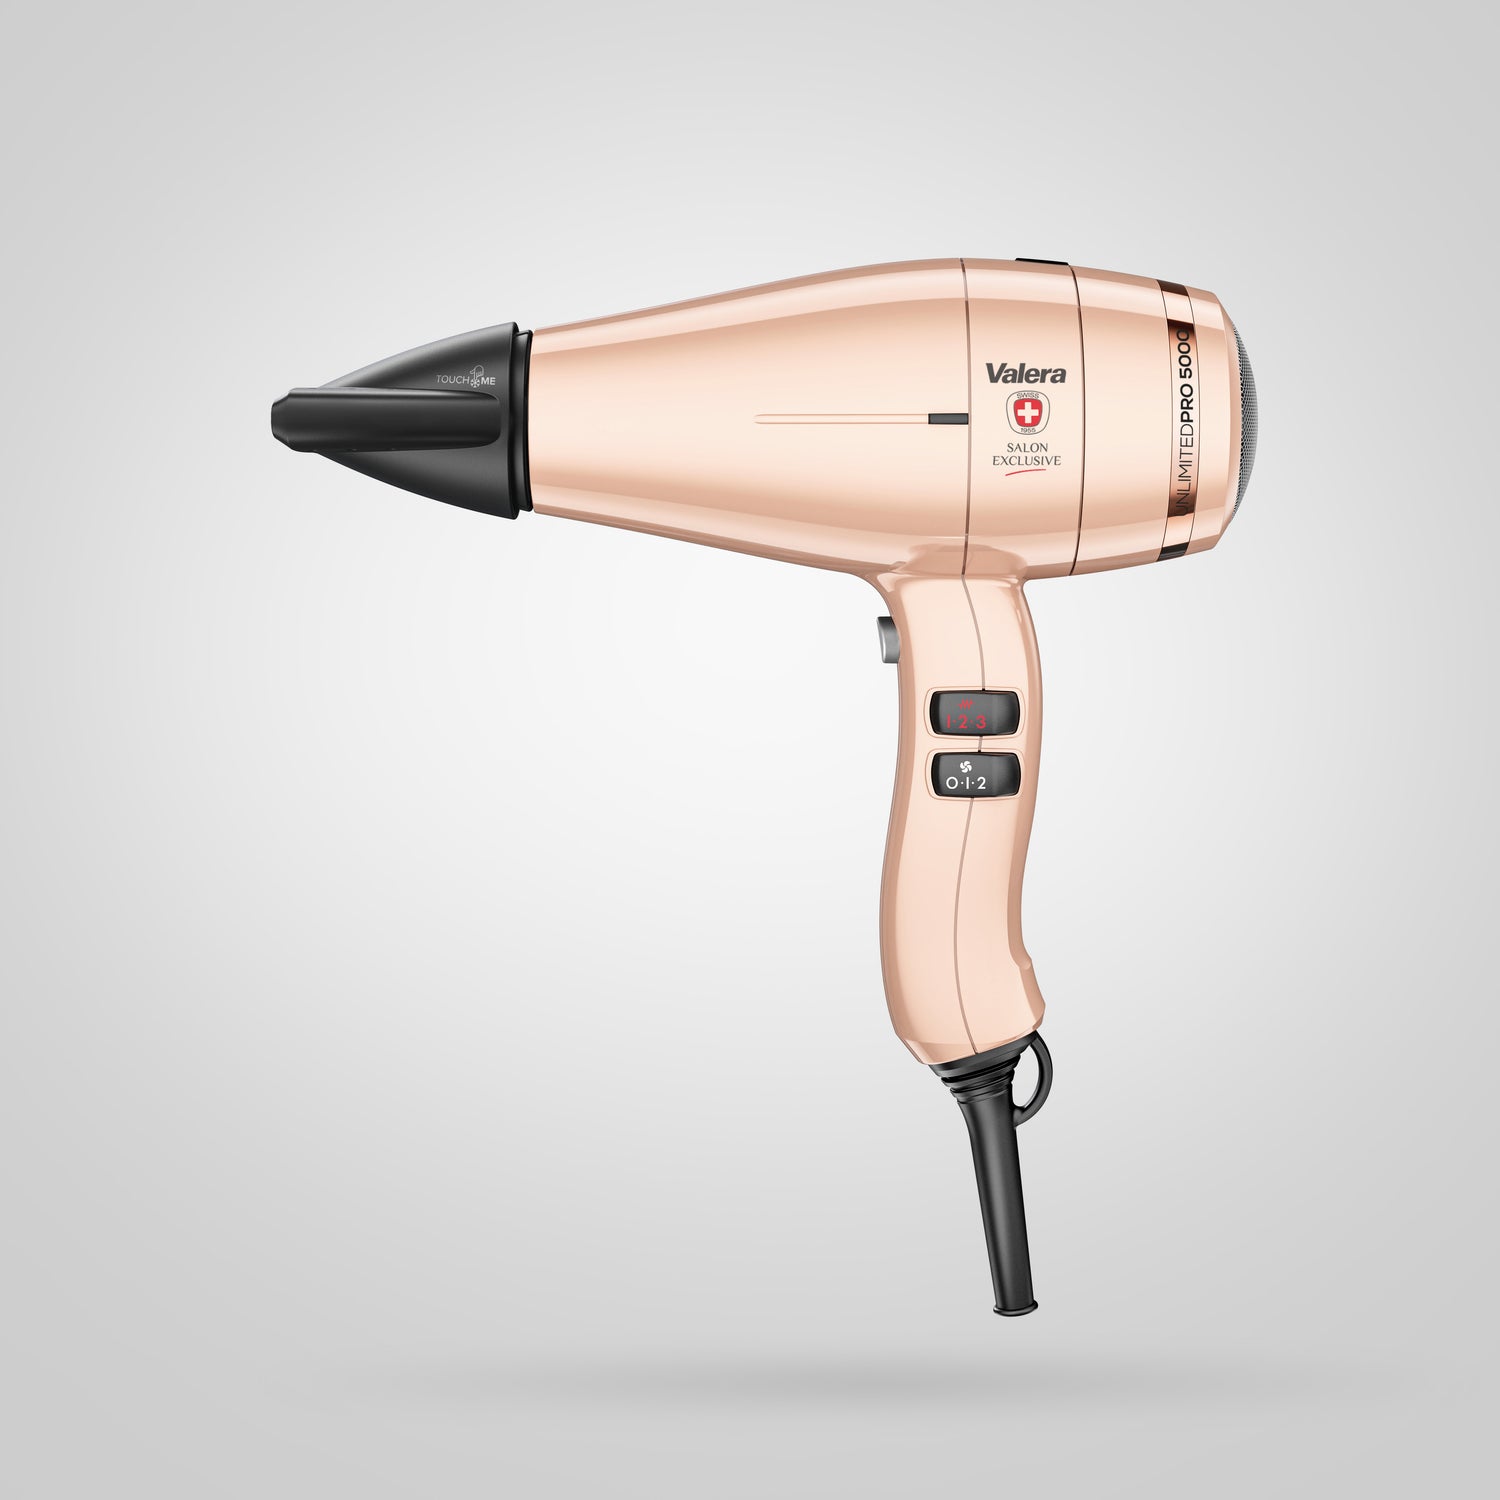 Unlimited Pro 5000 eQ professional hairdryer